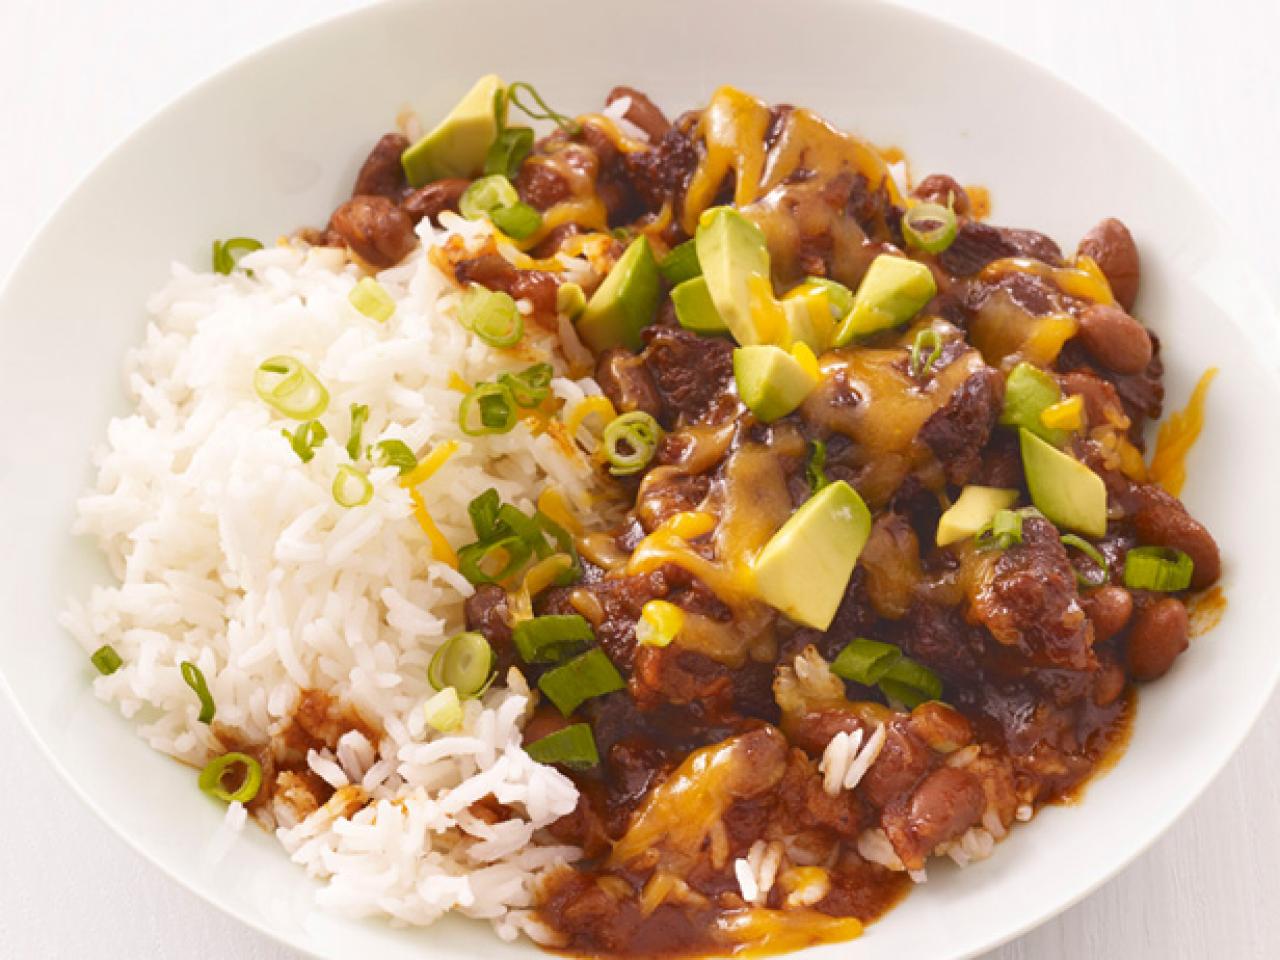 https://food.fnr.sndimg.com/content/dam/images/food/fullset/2013/10/4/2/FNM_110113-Slow-Cooker-Chili-With-Rice-Recipe_s4x3.jpg.rend.hgtvcom.1280.960.suffix/1386784370531.jpeg